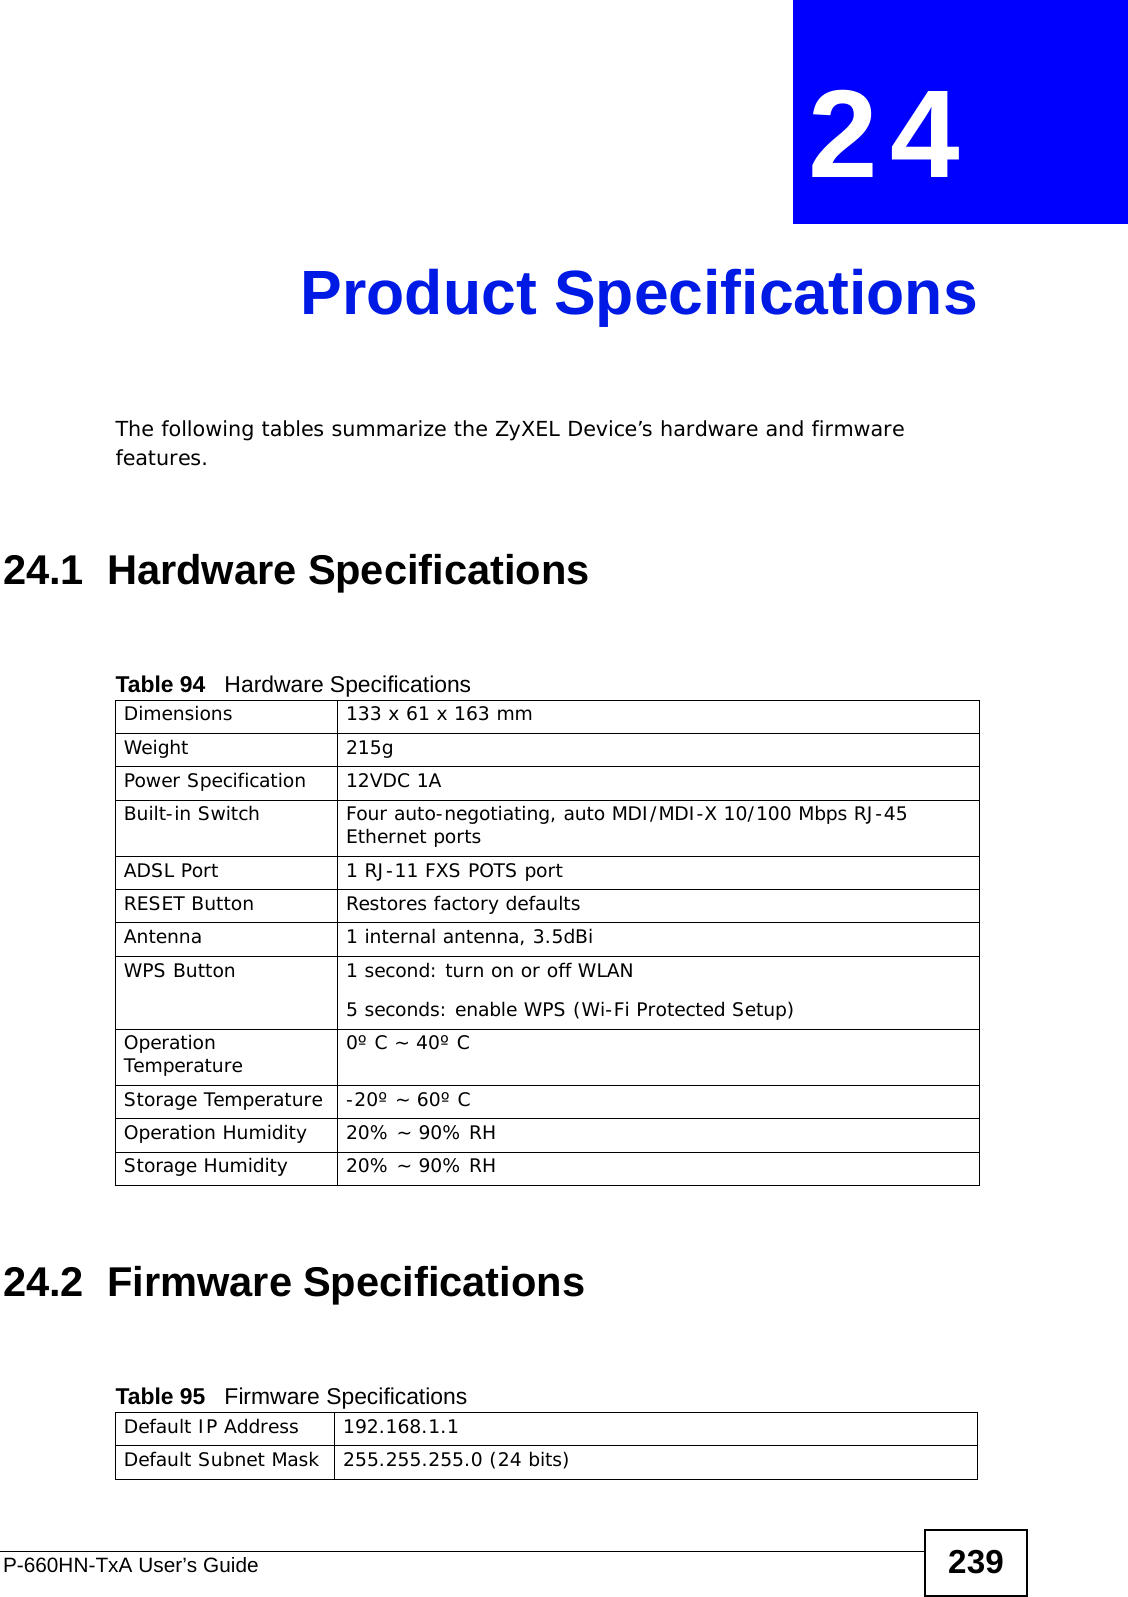 P-660HN-TxA User’s Guide 239CHAPTER  24 Product SpecificationsThe following tables summarize the ZyXEL Device’s hardware and firmware features.24.1  Hardware Specifications24.2  Firmware SpecificationsTable 94   Hardware SpecificationsDimensions 133 x 61 x 163 mmWeight 215gPower Specification 12VDC 1ABuilt-in Switch Four auto-negotiating, auto MDI/MDI-X 10/100 Mbps RJ-45 Ethernet portsADSL Port 1 RJ-11 FXS POTS portRESET Button Restores factory defaultsAntenna 1 internal antenna, 3.5dBiWPS Button 1 second: turn on or off WLAN5 seconds: enable WPS (Wi-Fi Protected Setup)Operation Temperature 0º C ~ 40º CStorage Temperature -20º ~ 60º COperation Humidity 20% ~ 90% RHStorage Humidity 20% ~ 90% RHTable 95   Firmware Specifications Default IP Address 192.168.1.1Default Subnet Mask 255.255.255.0 (24 bits)